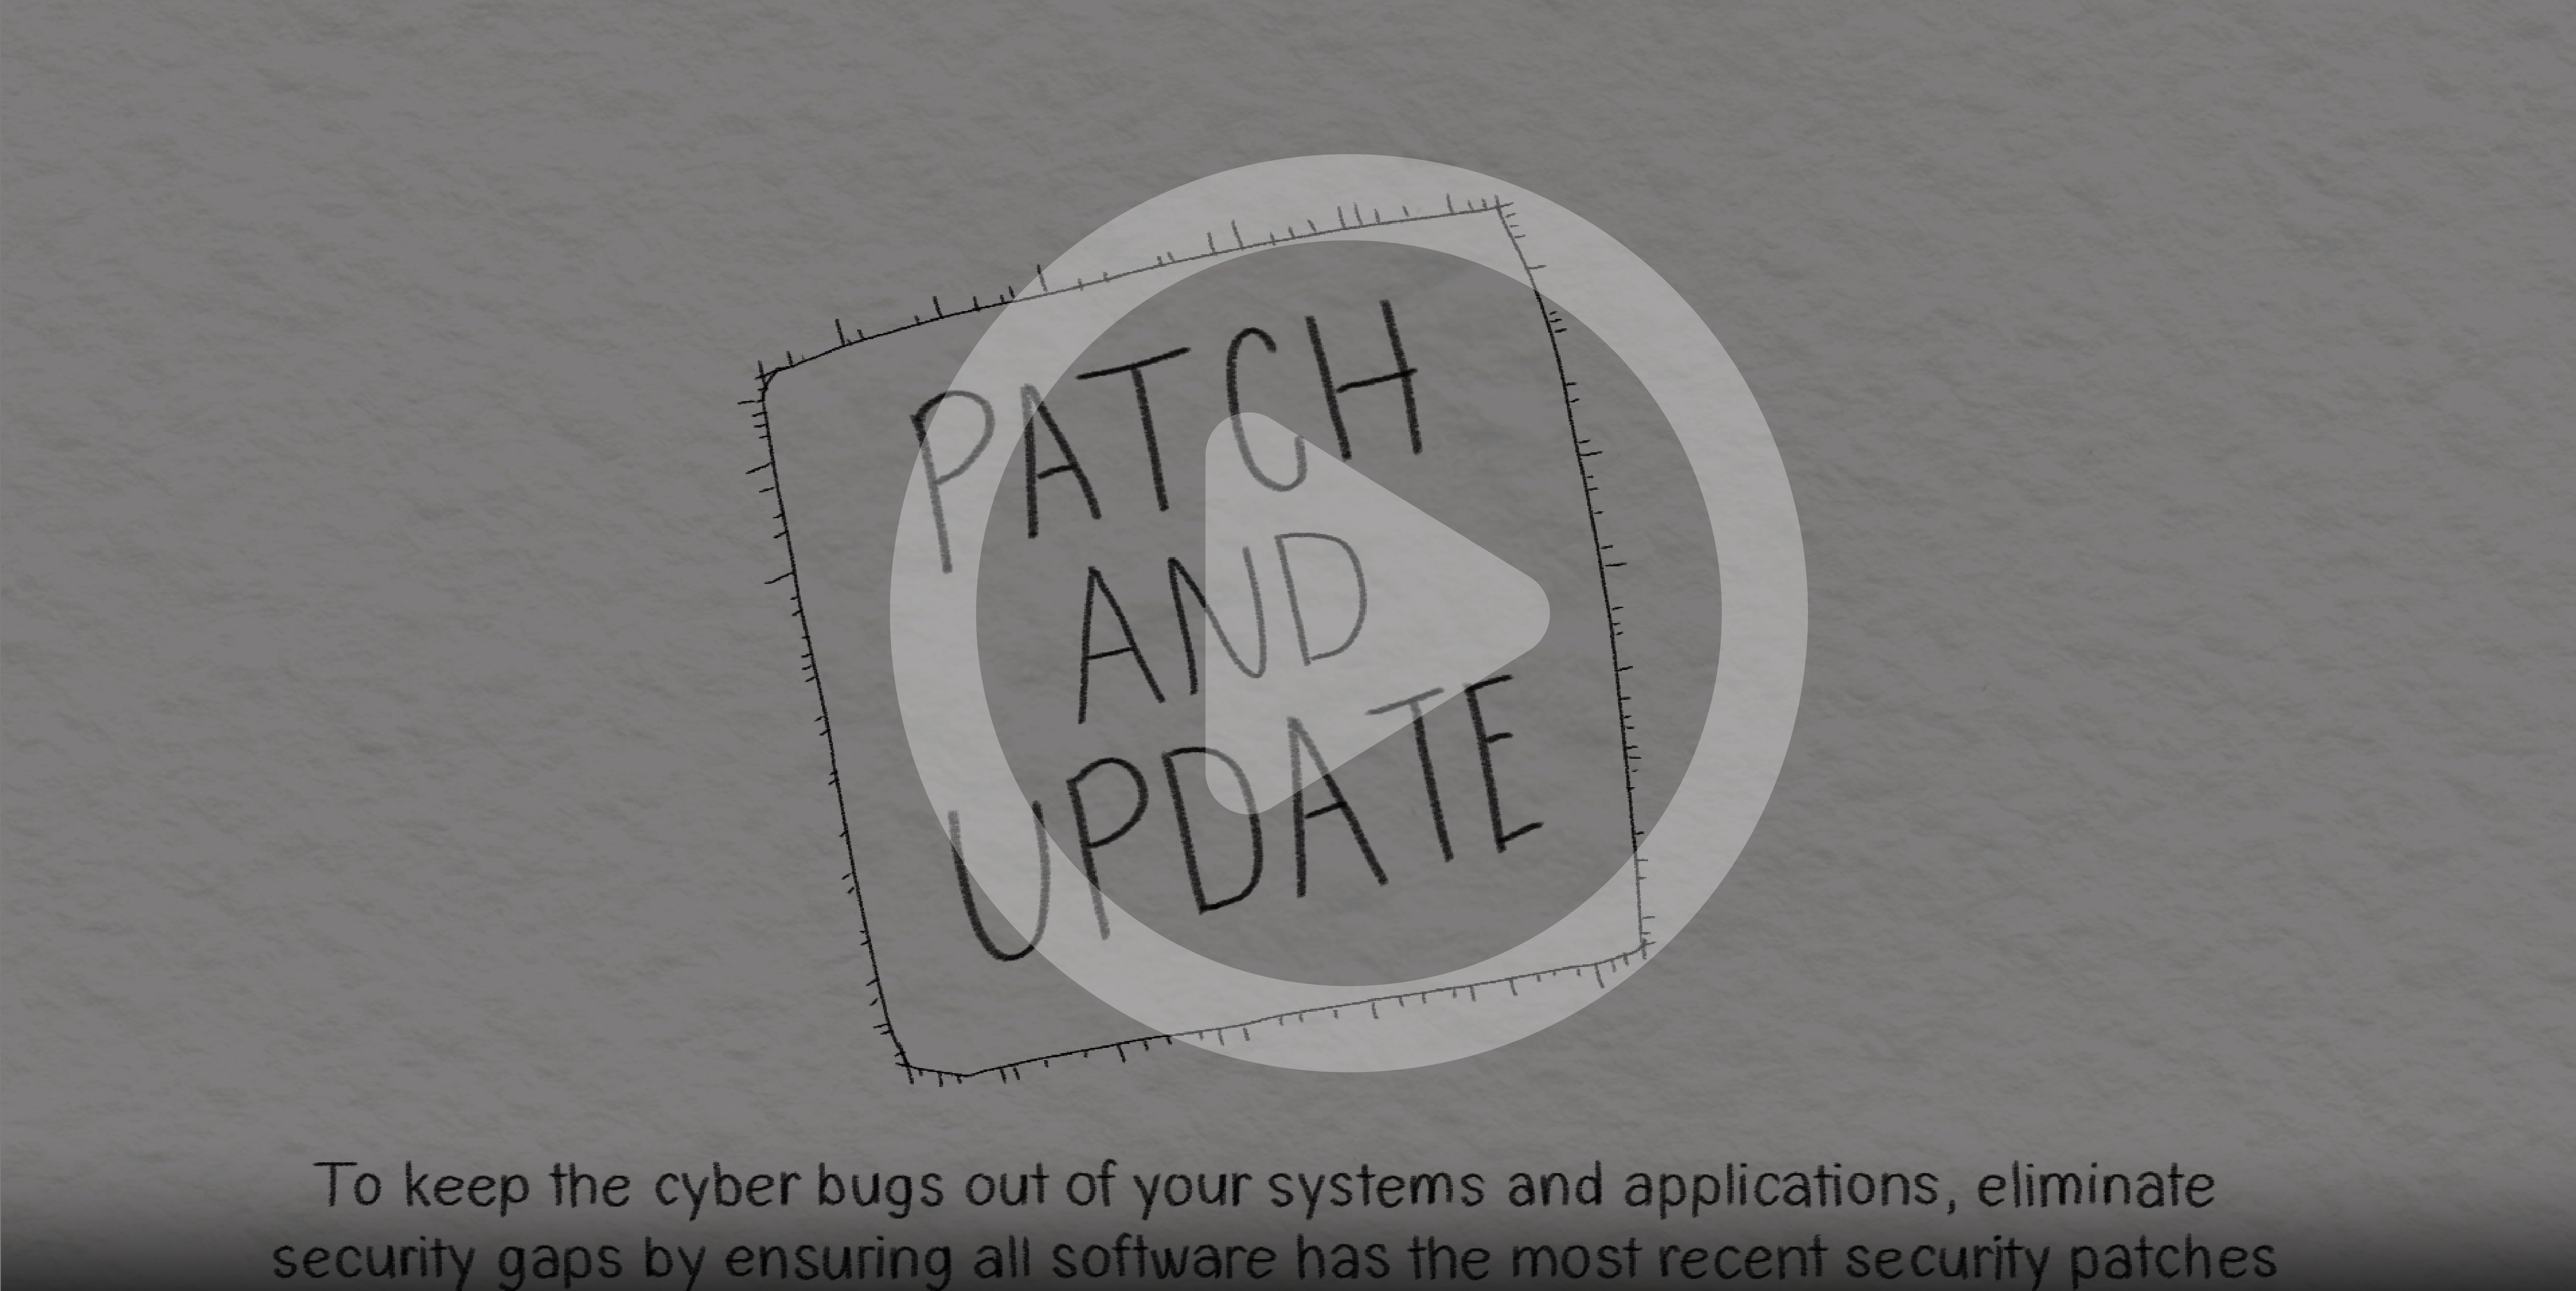 Cyber Security - Patch and Update